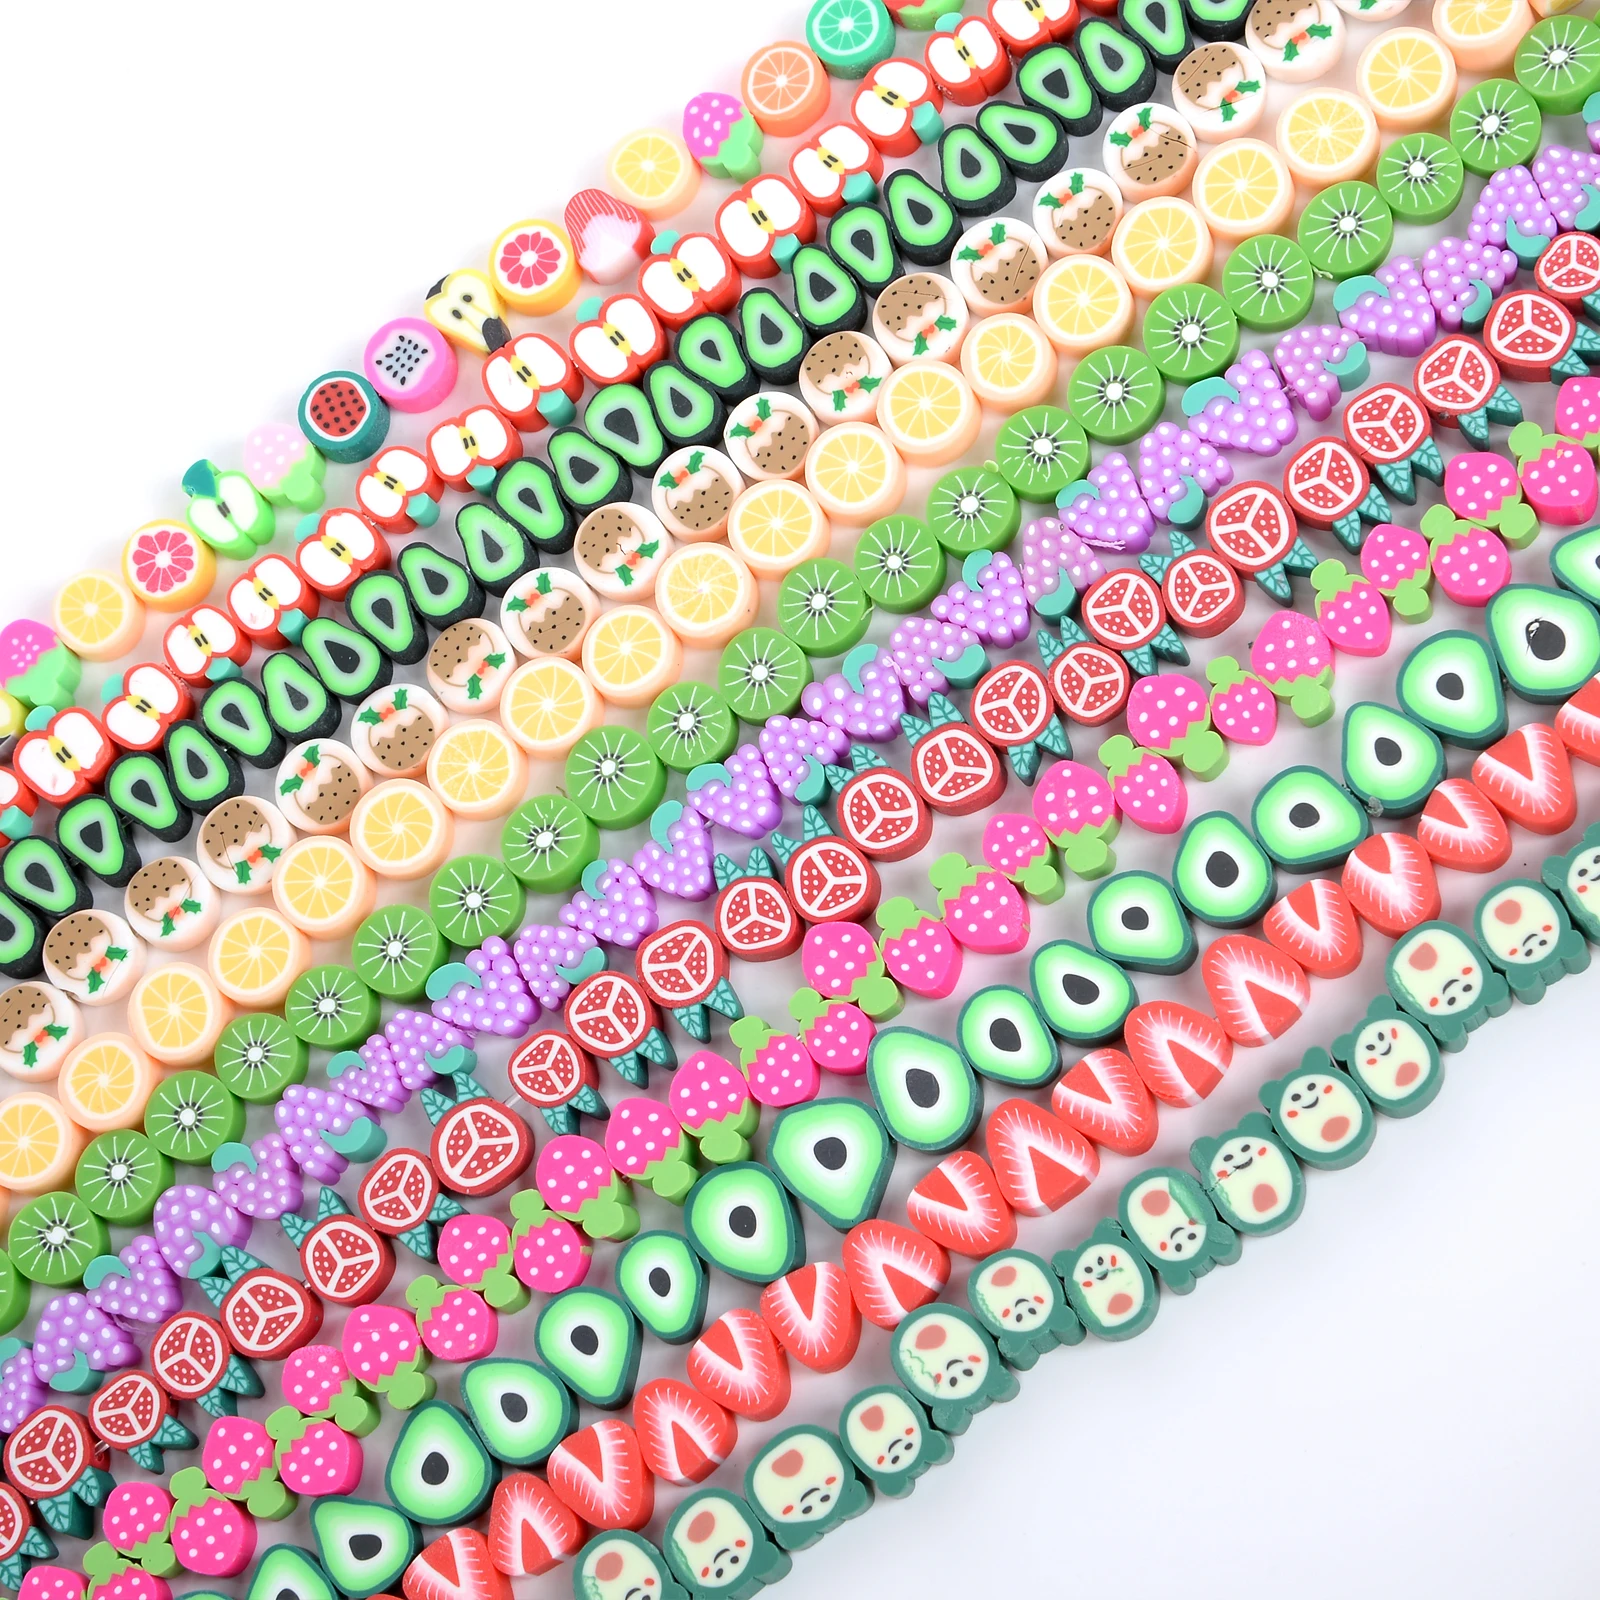 
10MM 30Pcs Fruits Polymer Clay Beads Spacer Round Loose Beads for Jewelry Making DIY Bracelet Beads 